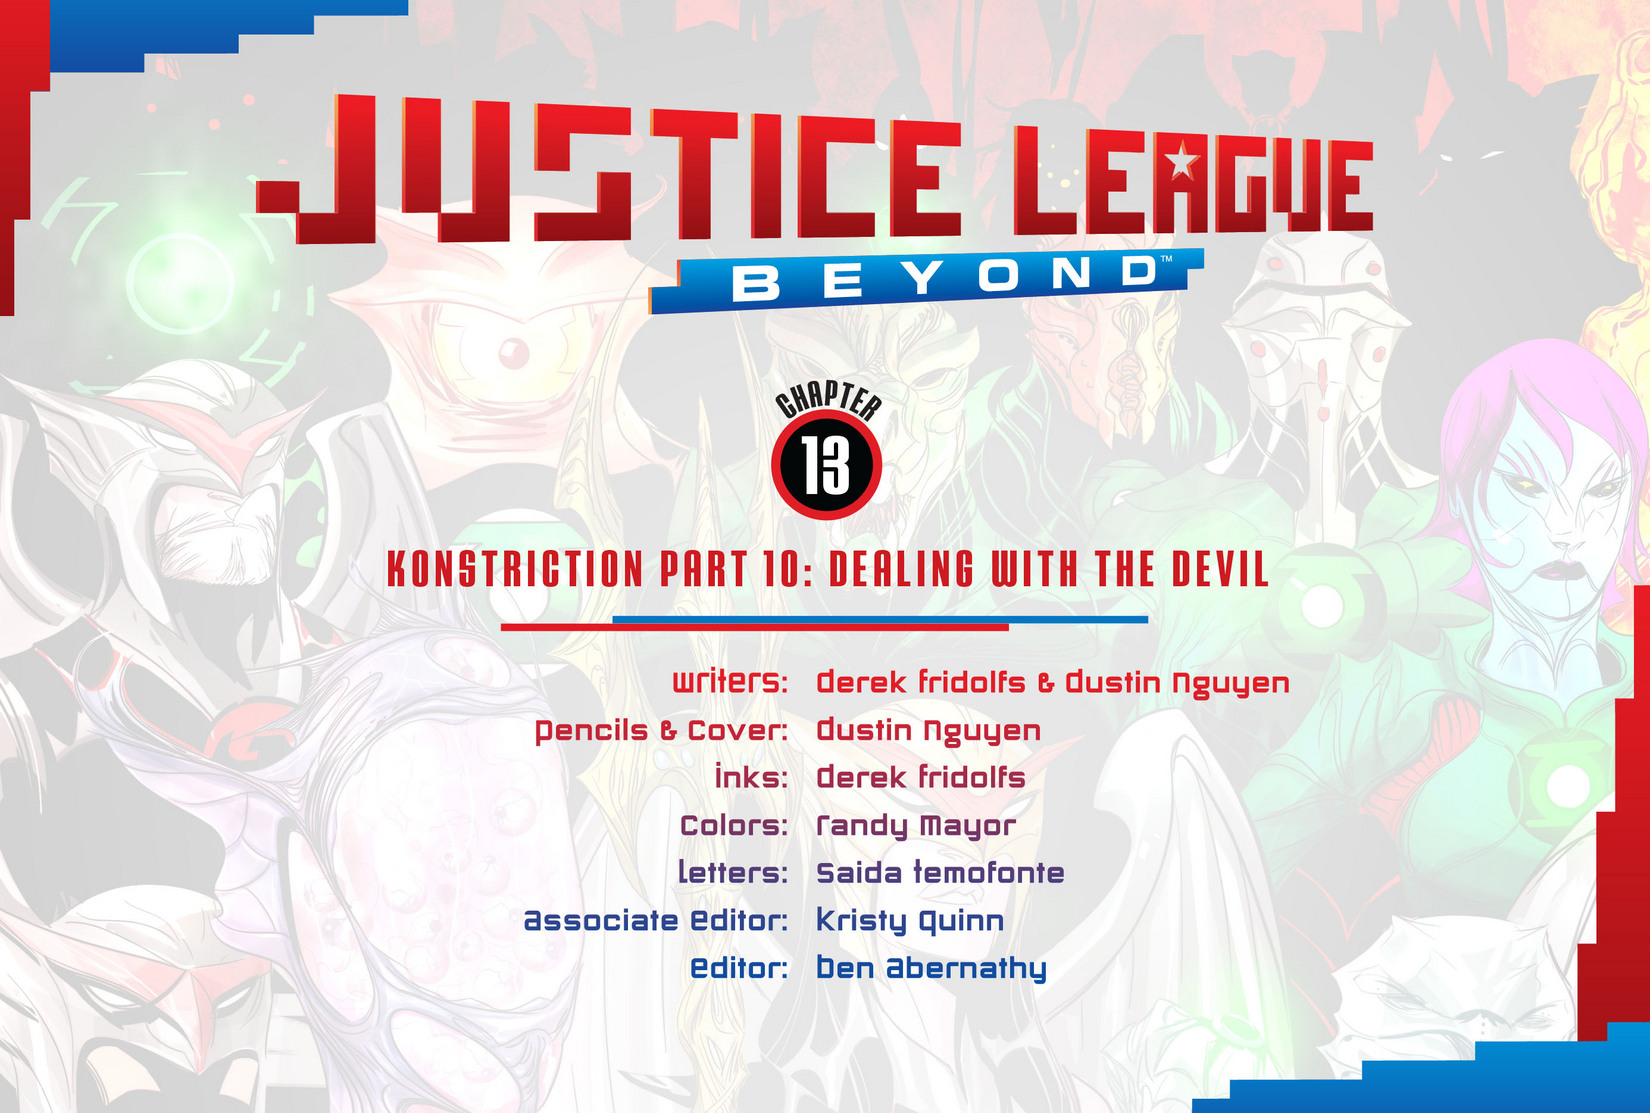 Read online Justice League Beyond comic -  Issue #13 - 2